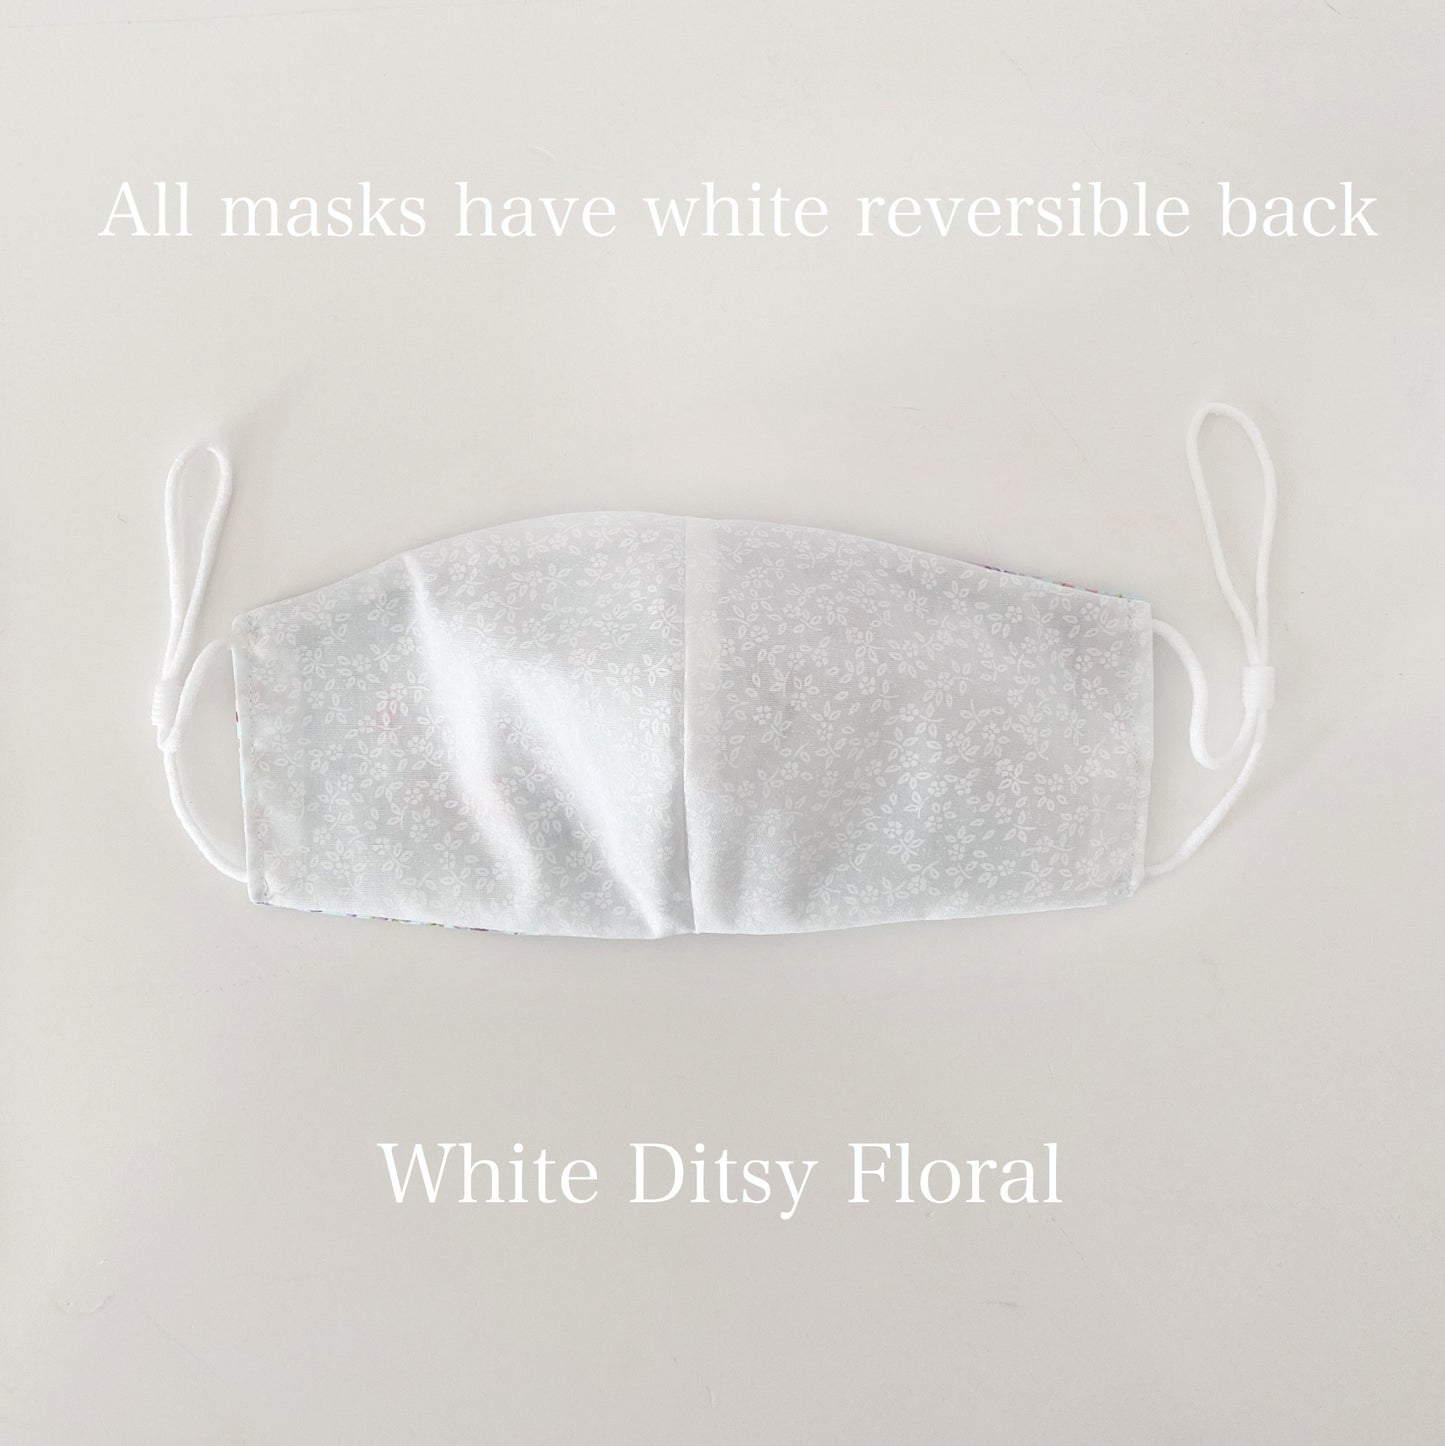 GREY FLORAL REVERSIBLE 2 in 1 Mask Adjustable Super Soft Elastic. Washable Reusable homemade face masks Double layer cotton made in U.K.